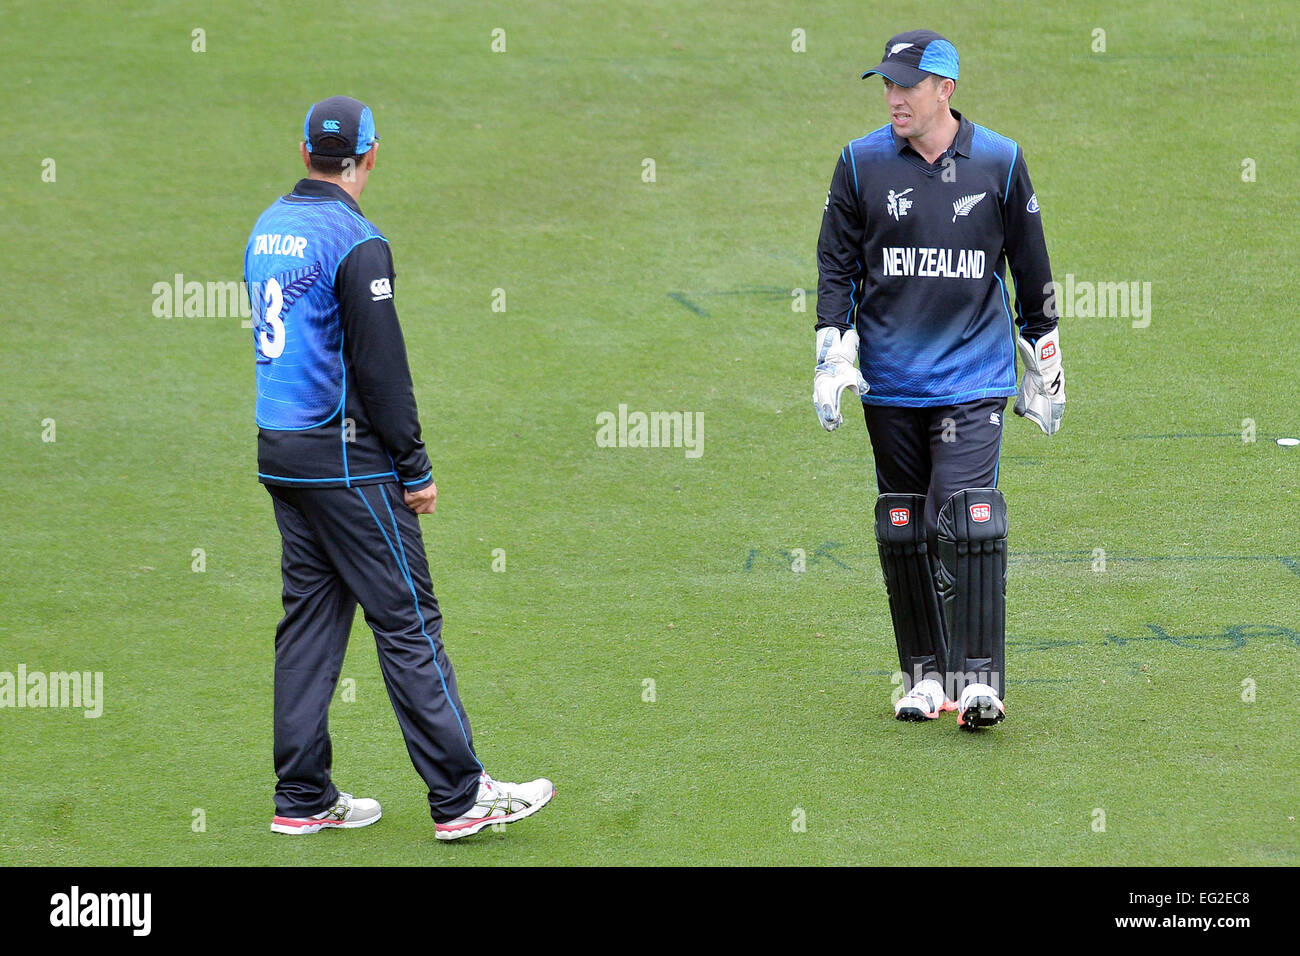 Christchurch, New Zealand. 14th Feb, 2015. Christchurch, New Zealand - February 14, 2015 - Ross Taylor and Luke Ronchi both of New Zealand (L-R) during the ICC Cricket World Cup Match between Sri Lanka and New Zealand at Hagley Oval on February 14, 2015 in Christchurch, New Zealand. © dpa/Alamy Live News Stock Photo